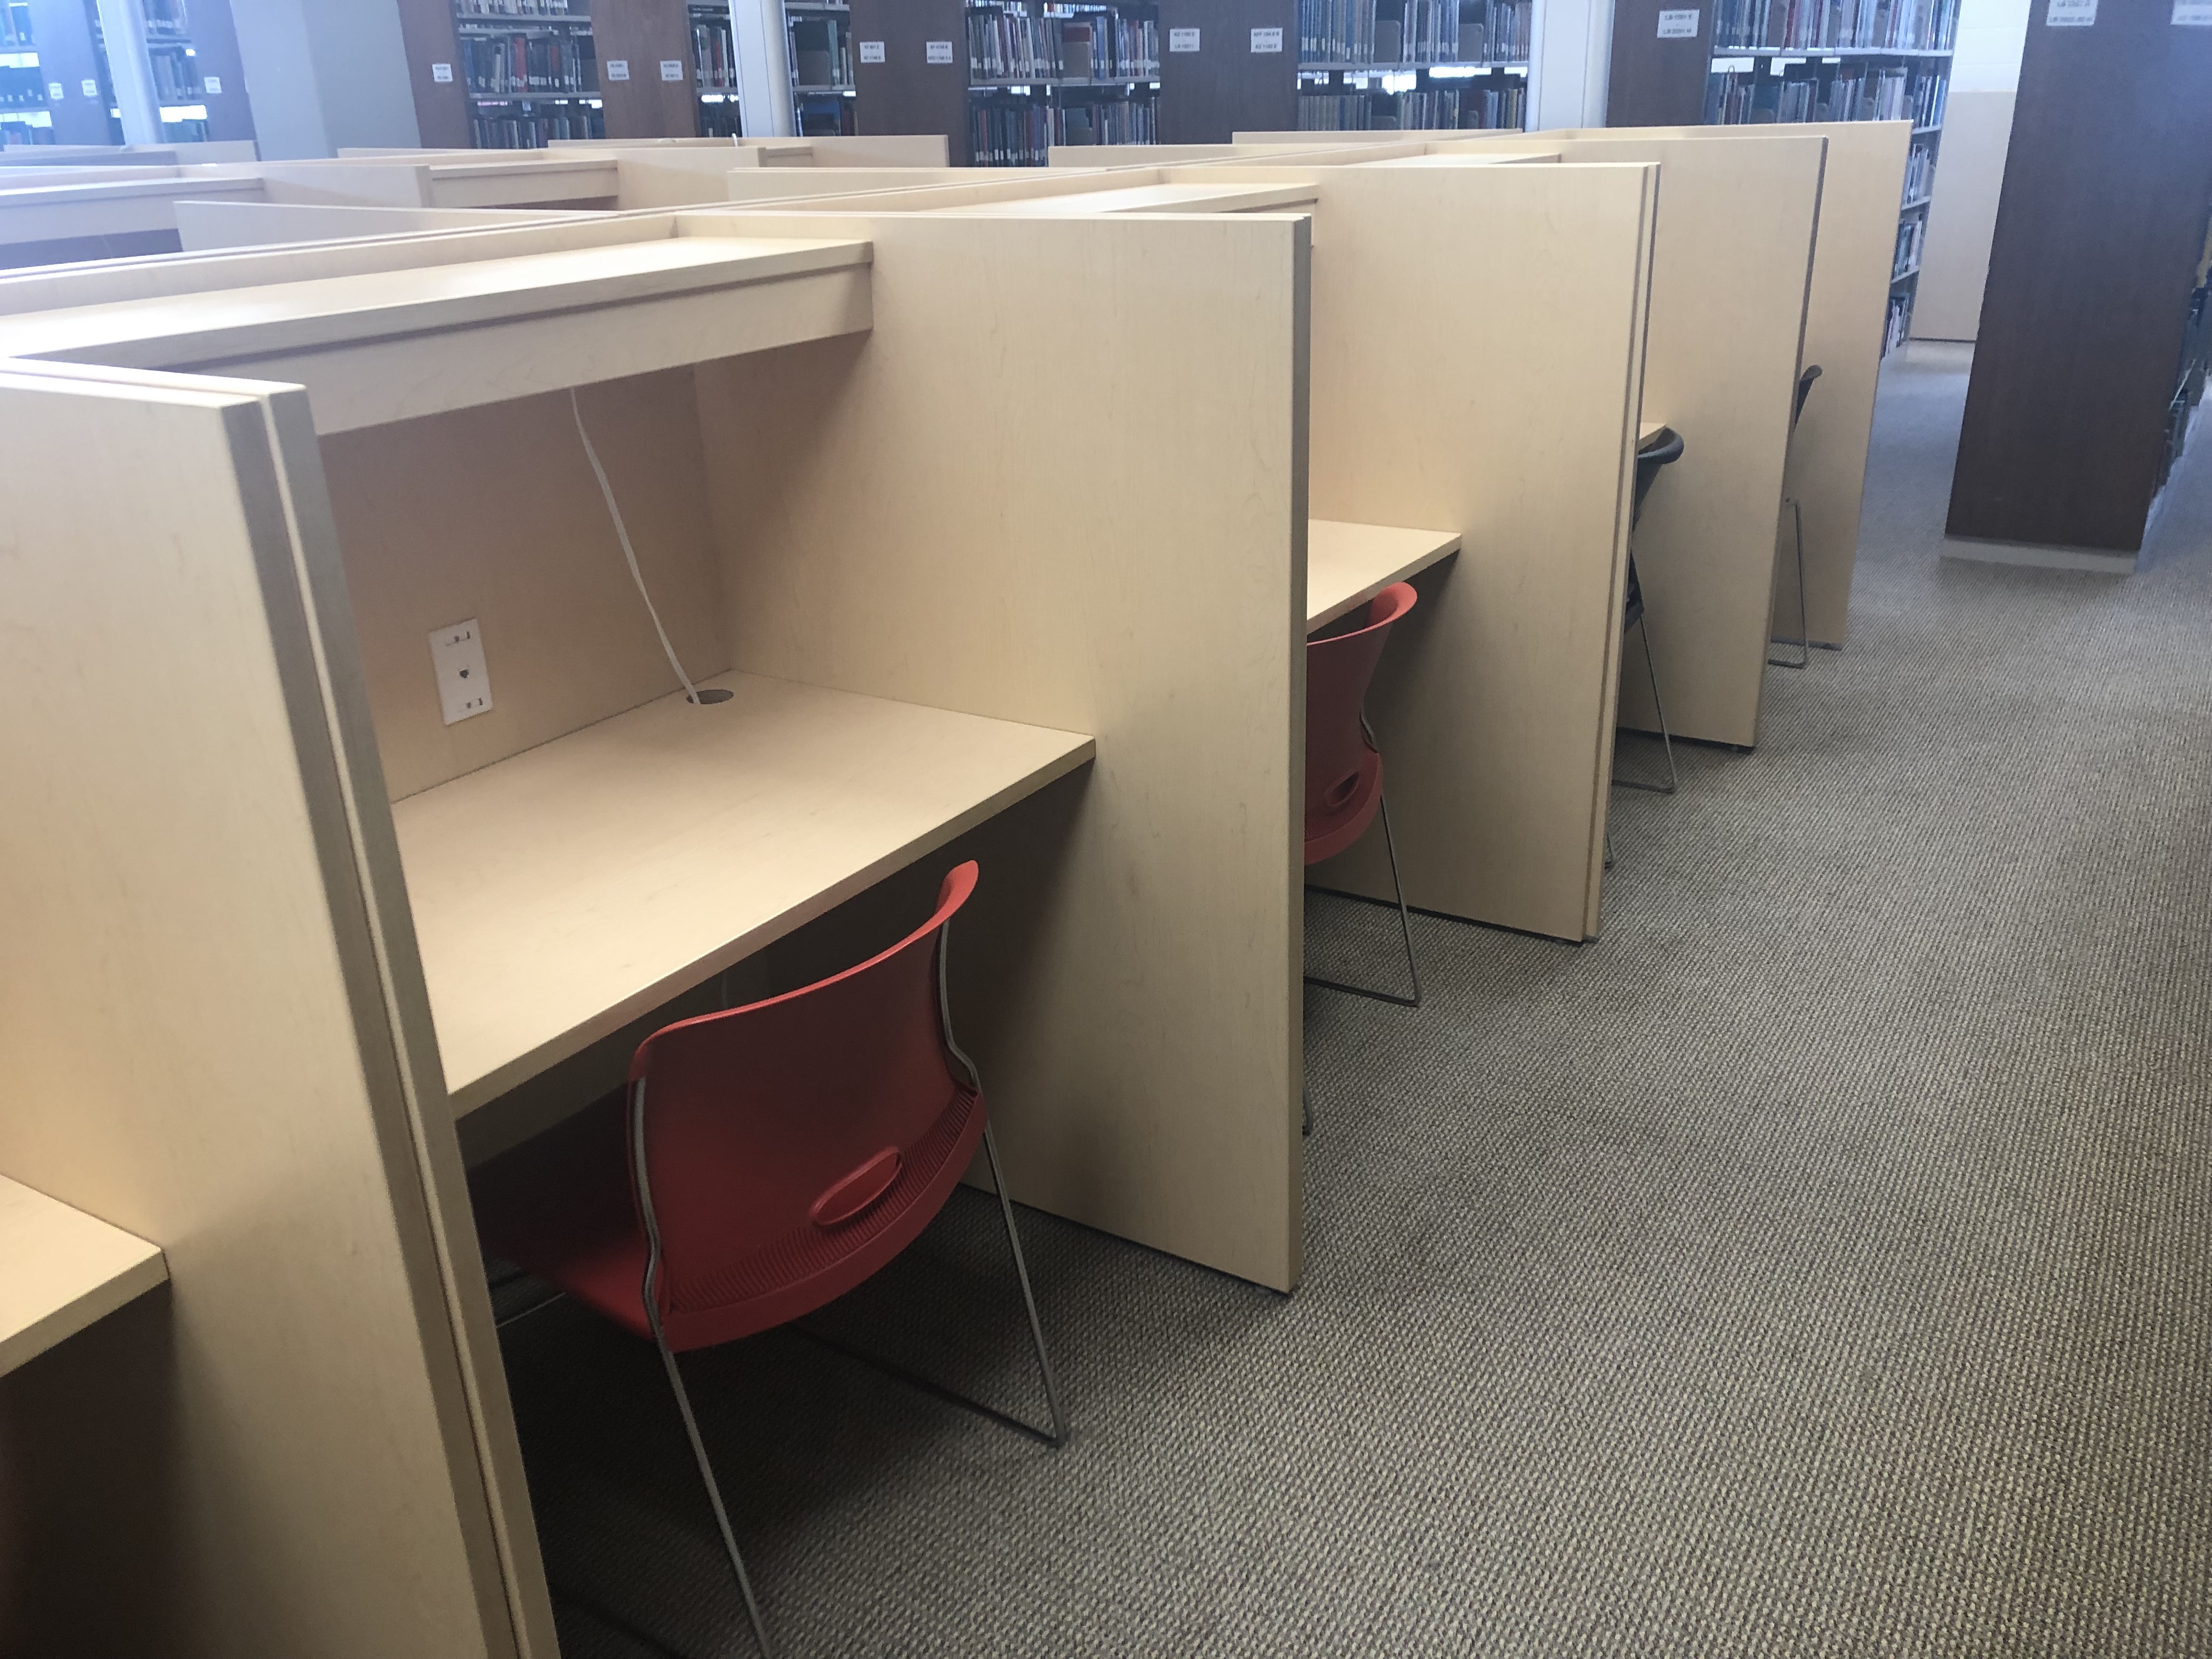 A row of study carrels. Desks side by side with privacy partition between them. Not much space under the desk for a guide dog.